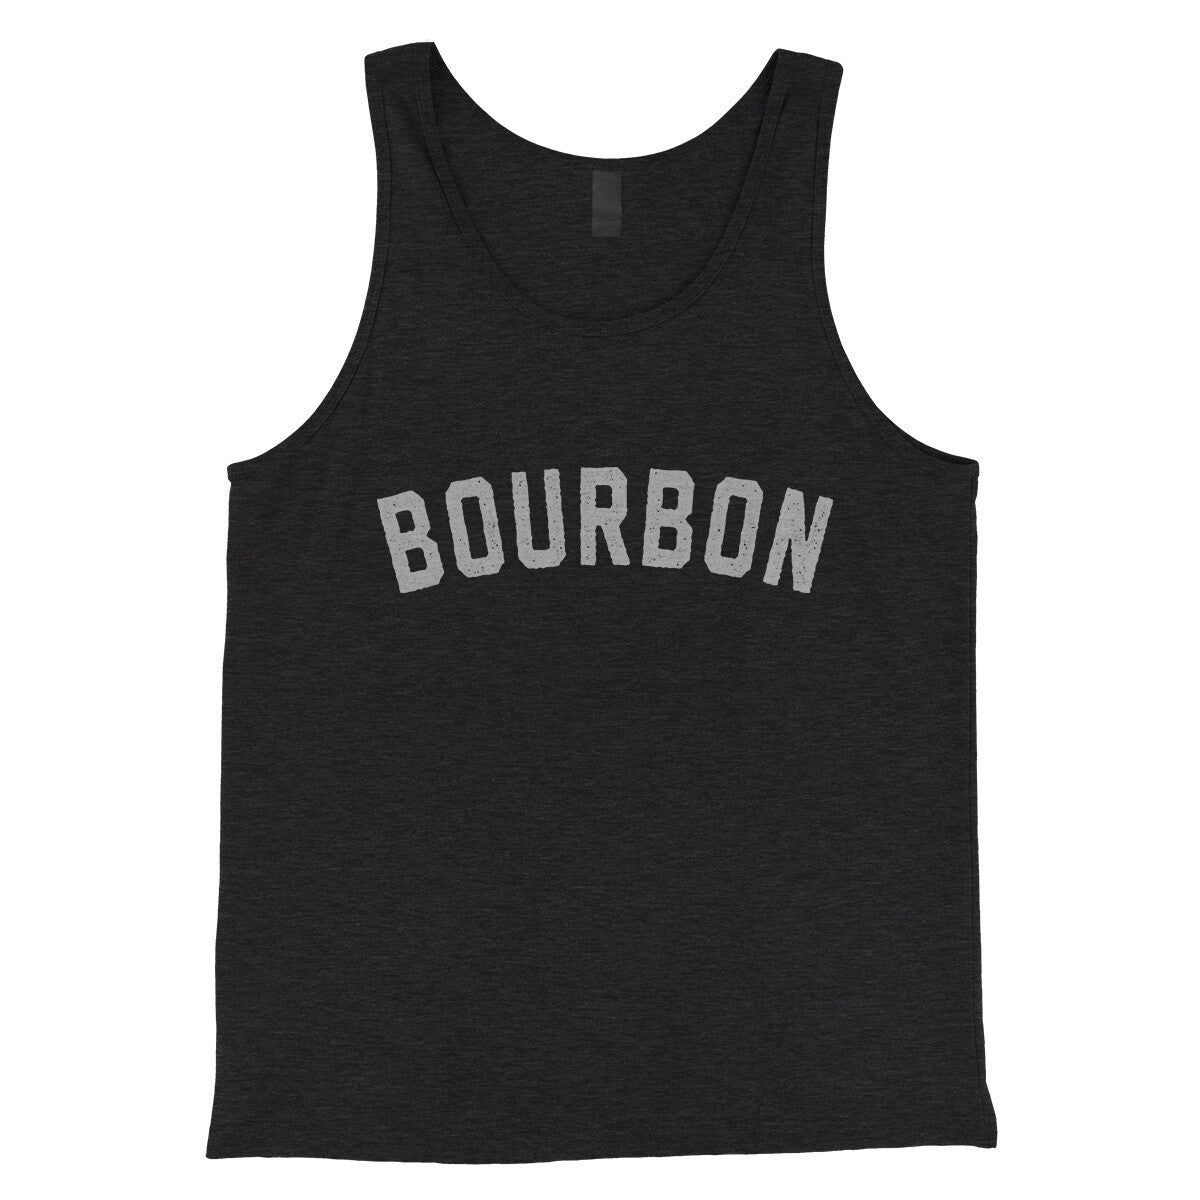 Bourbon in Charcoal Black TriBlend Color